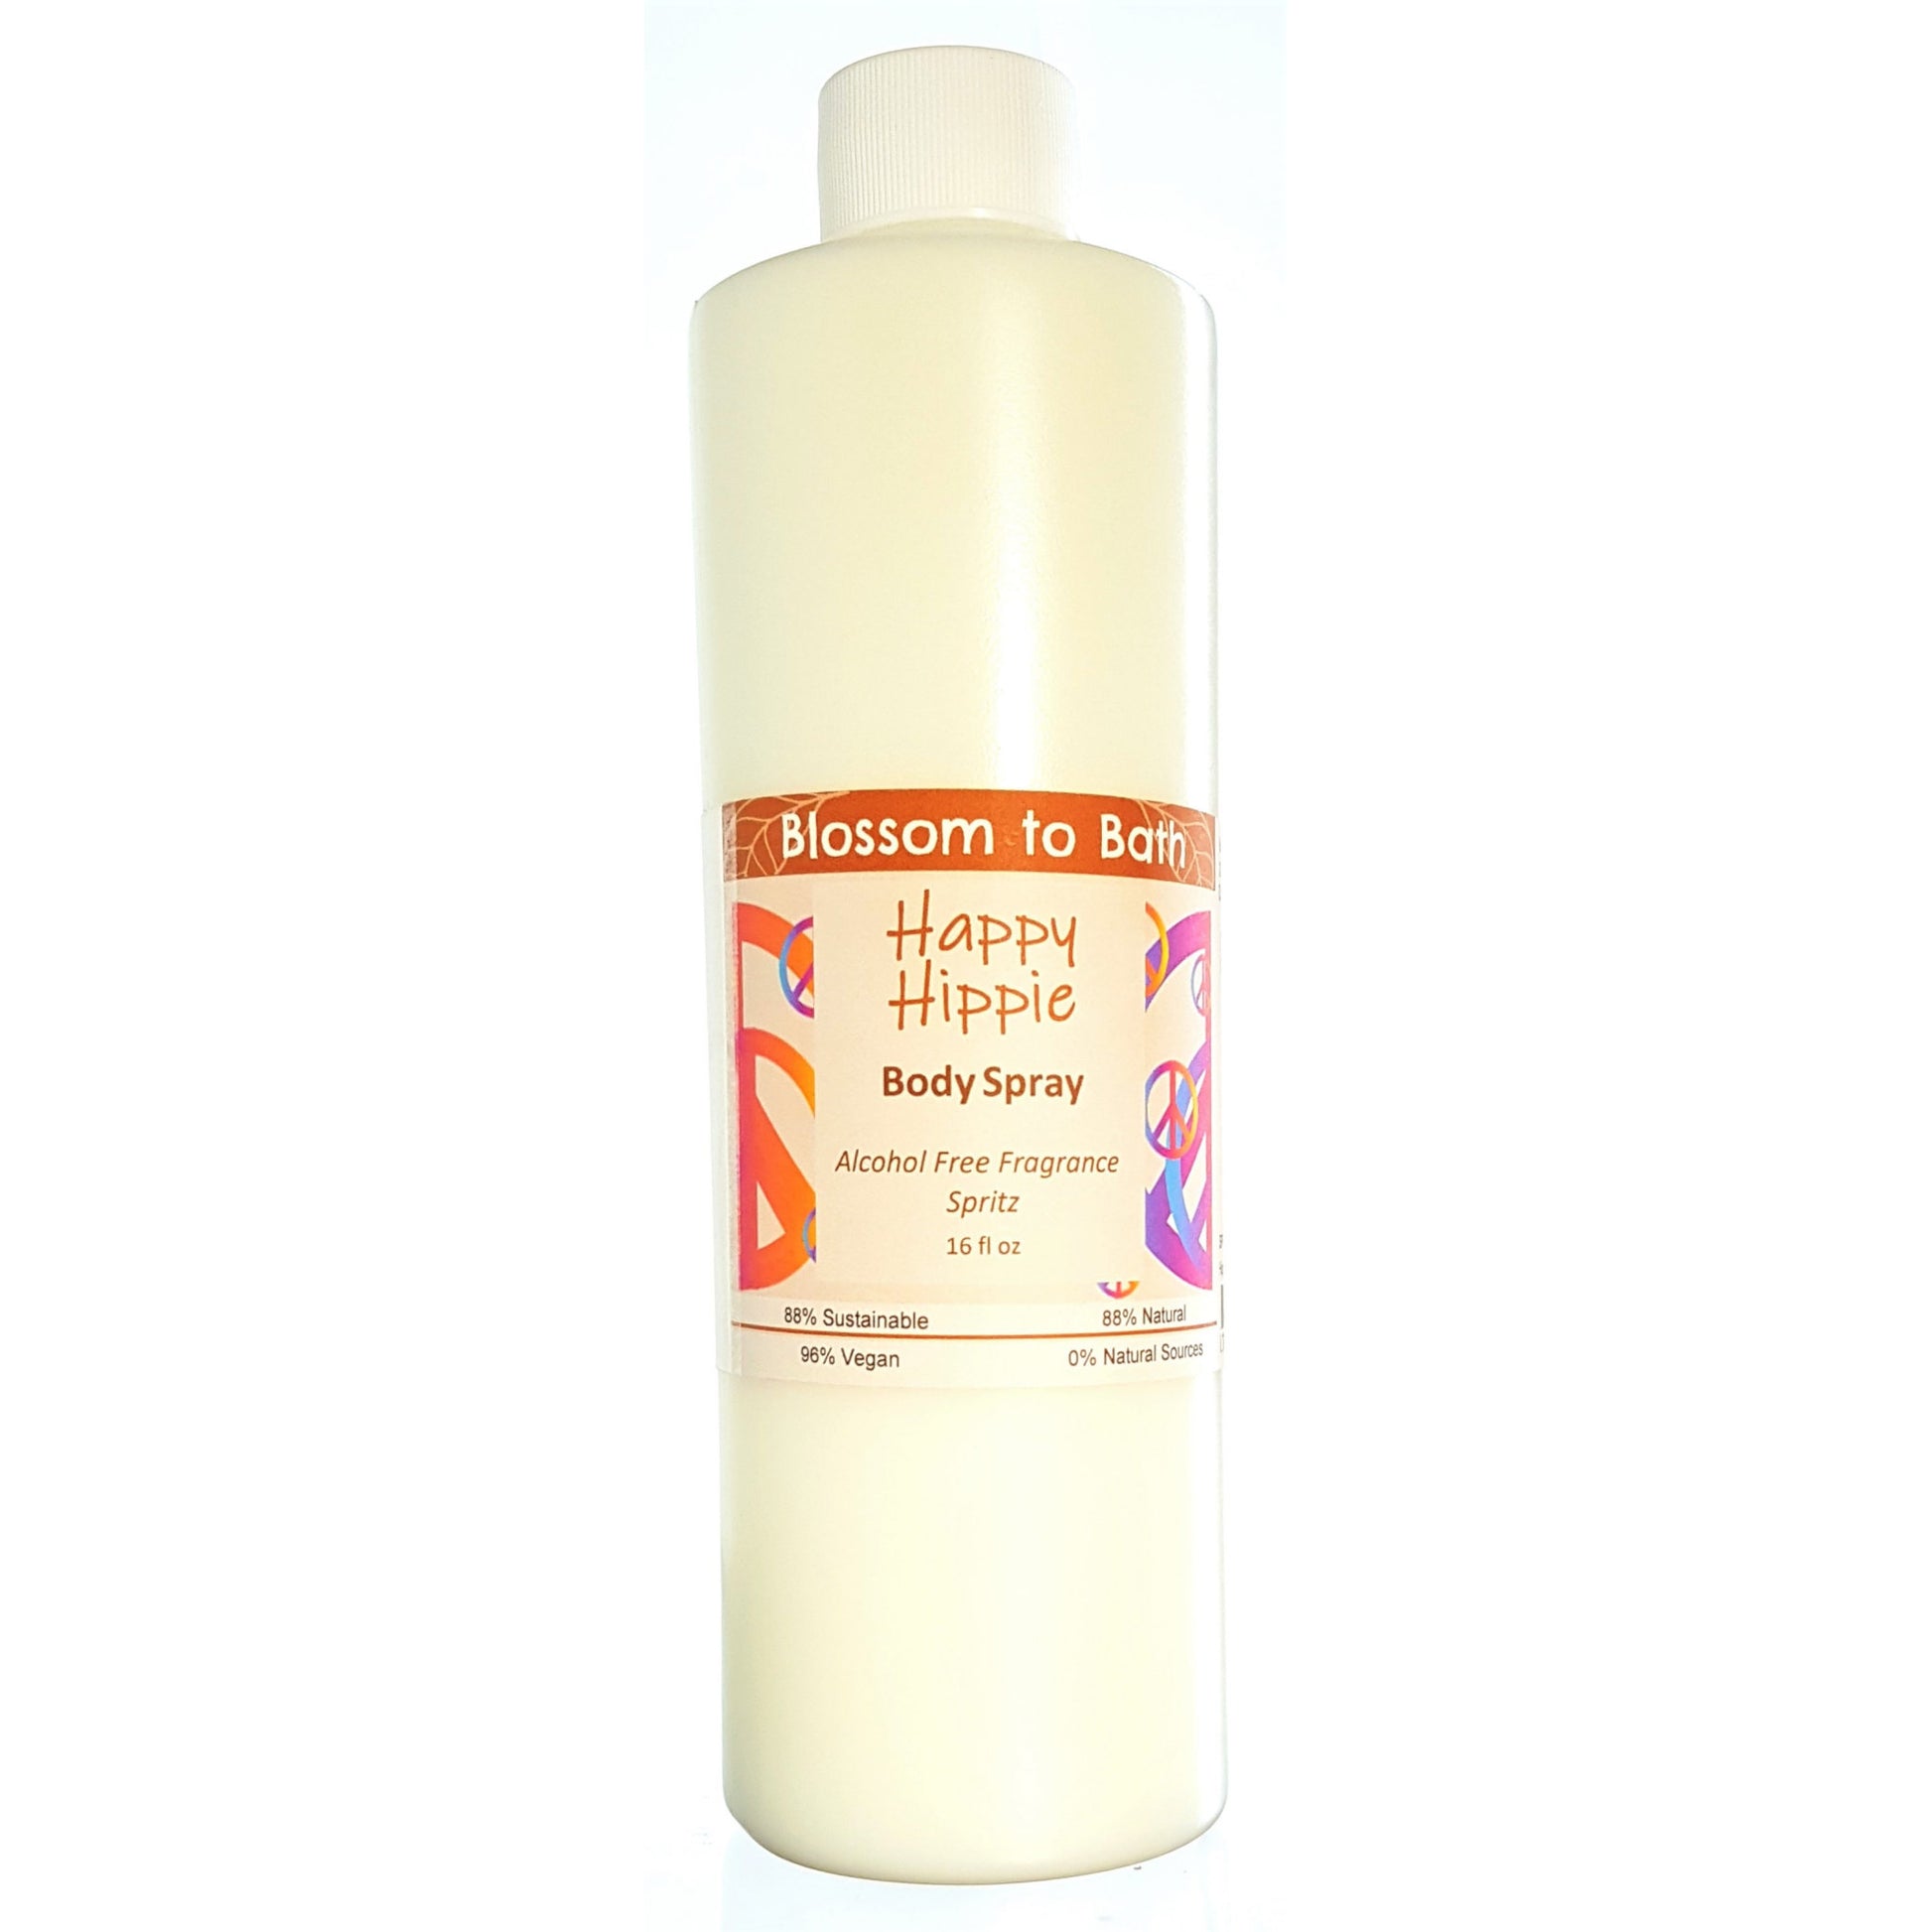 Buy Blossom to Bath Happy Hippie Body Spray from Flowersong Soap Studio.  Natural luxurious freshening of skin, linens, or air  A refreshing herbal fragrance that elevates your mood and your perspective.